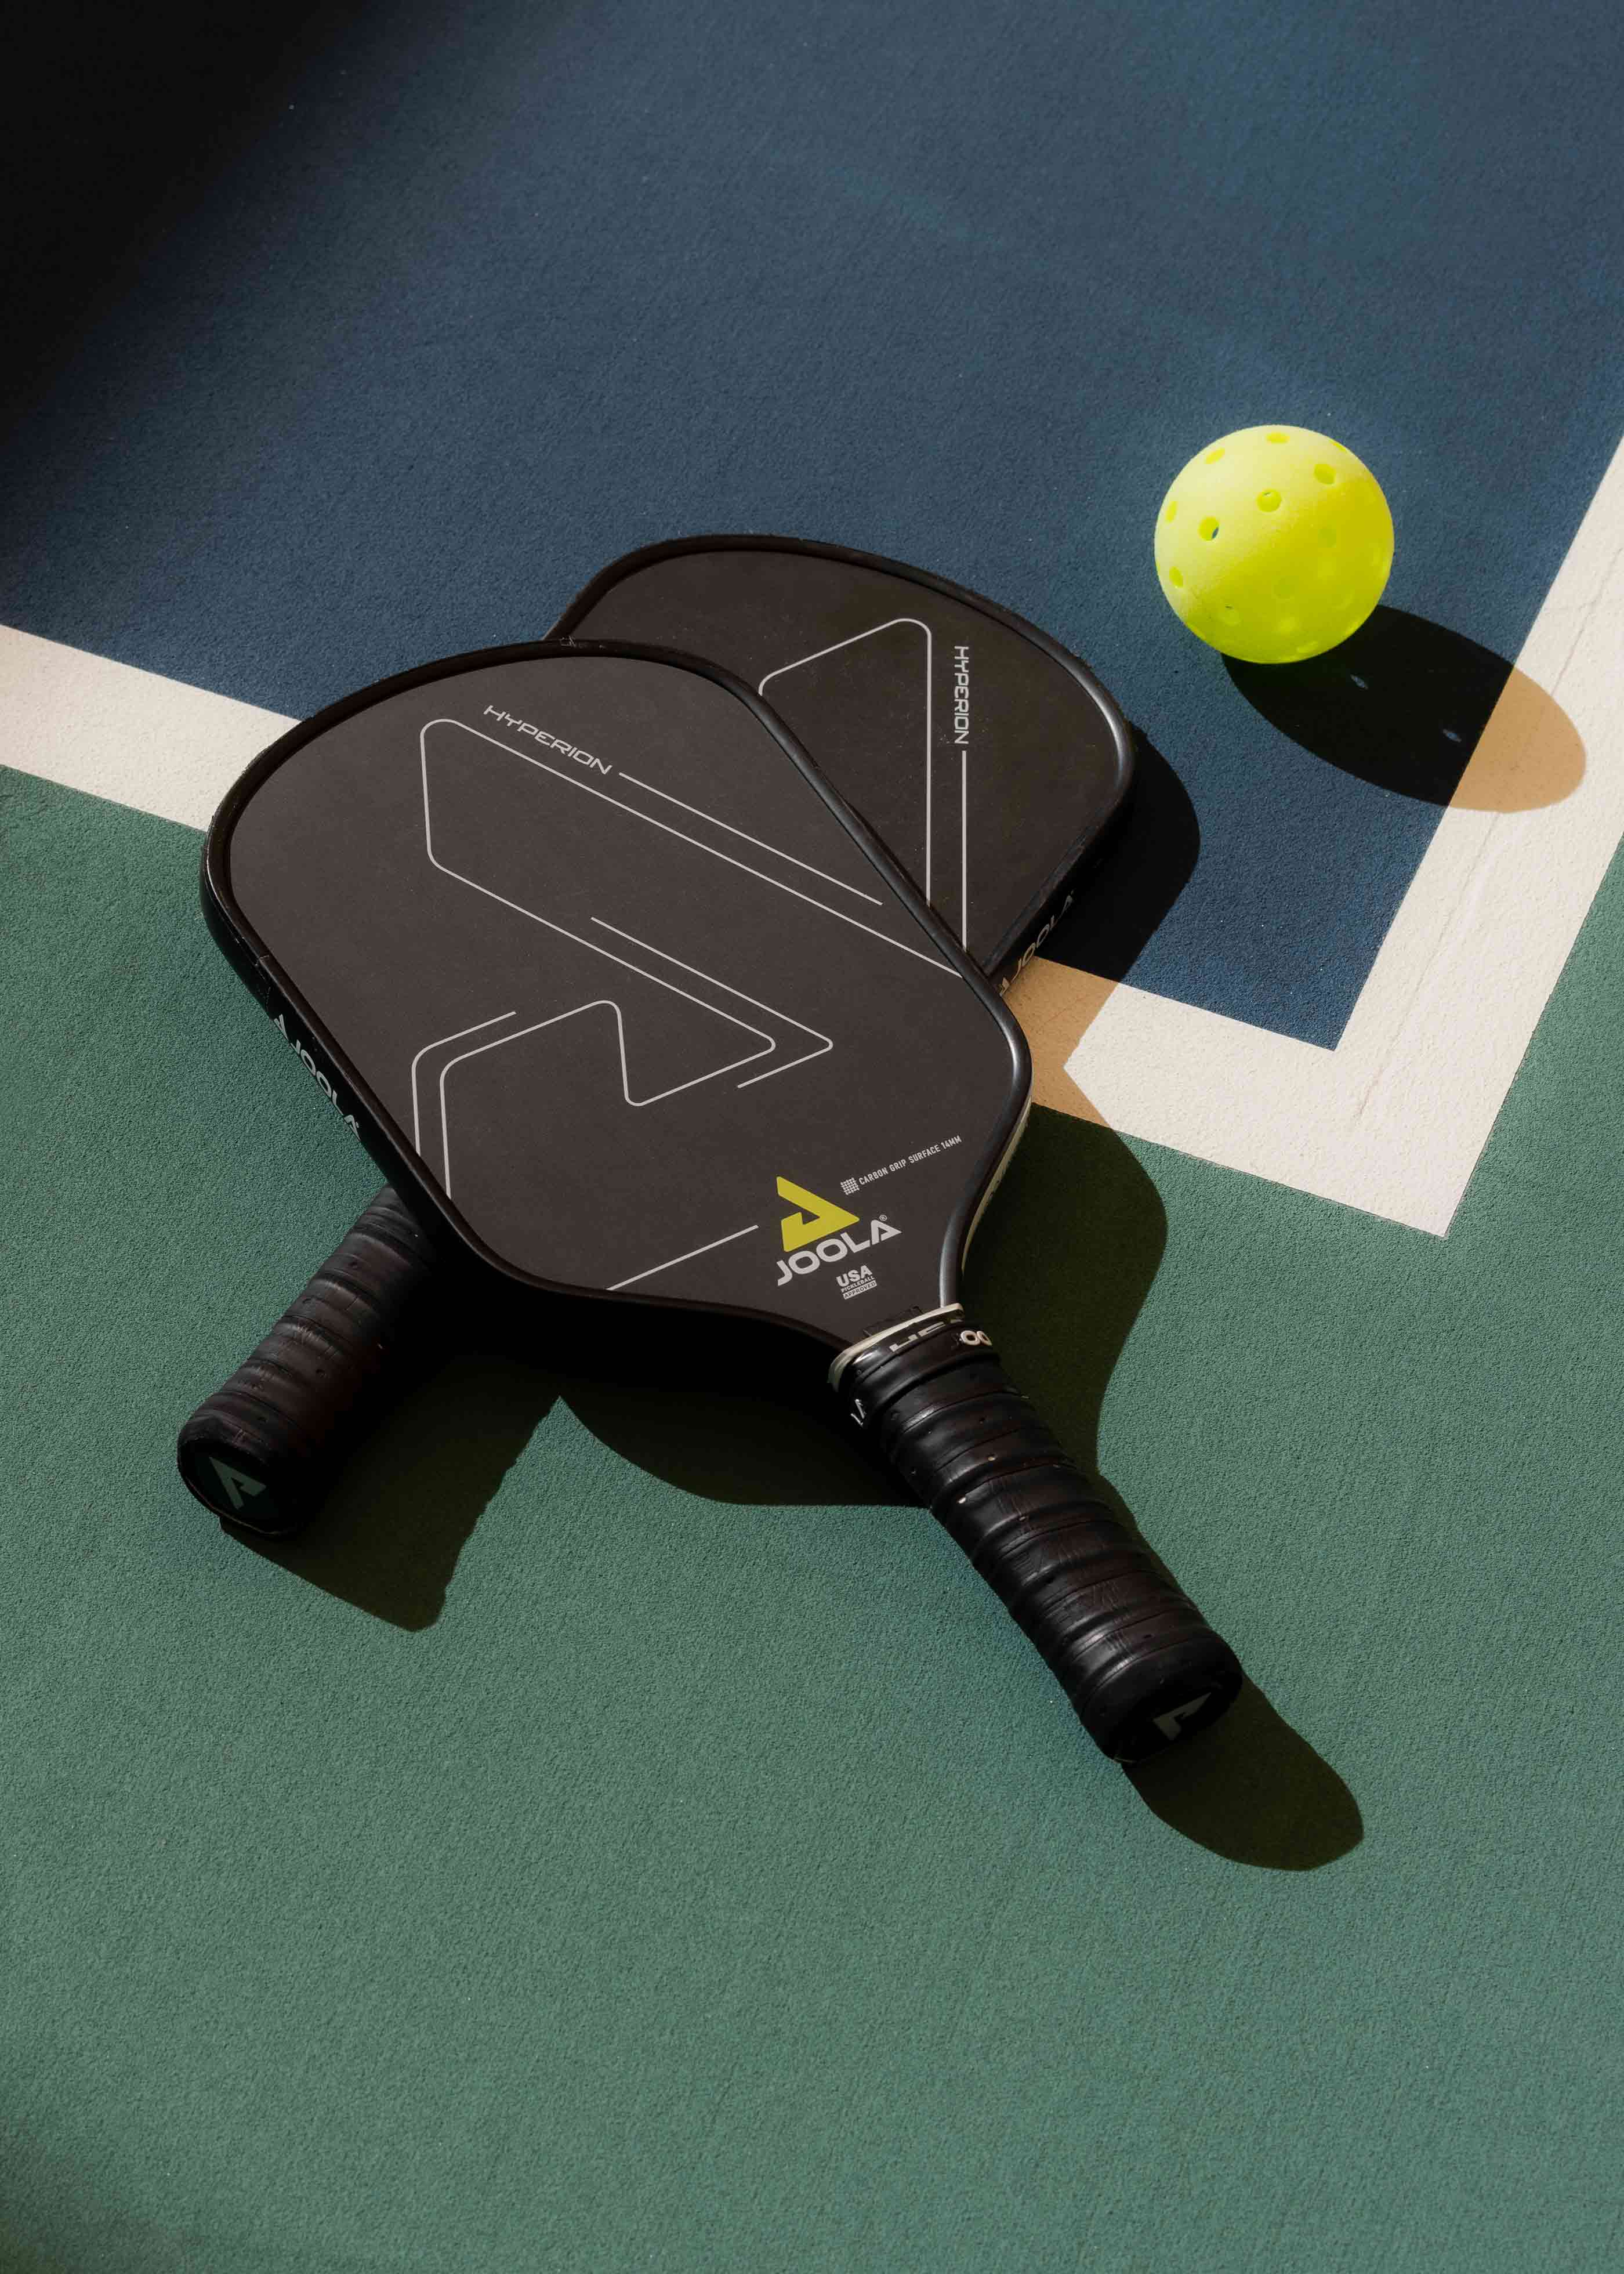 Two pickleball paddles and a ball laying on a pickleball court